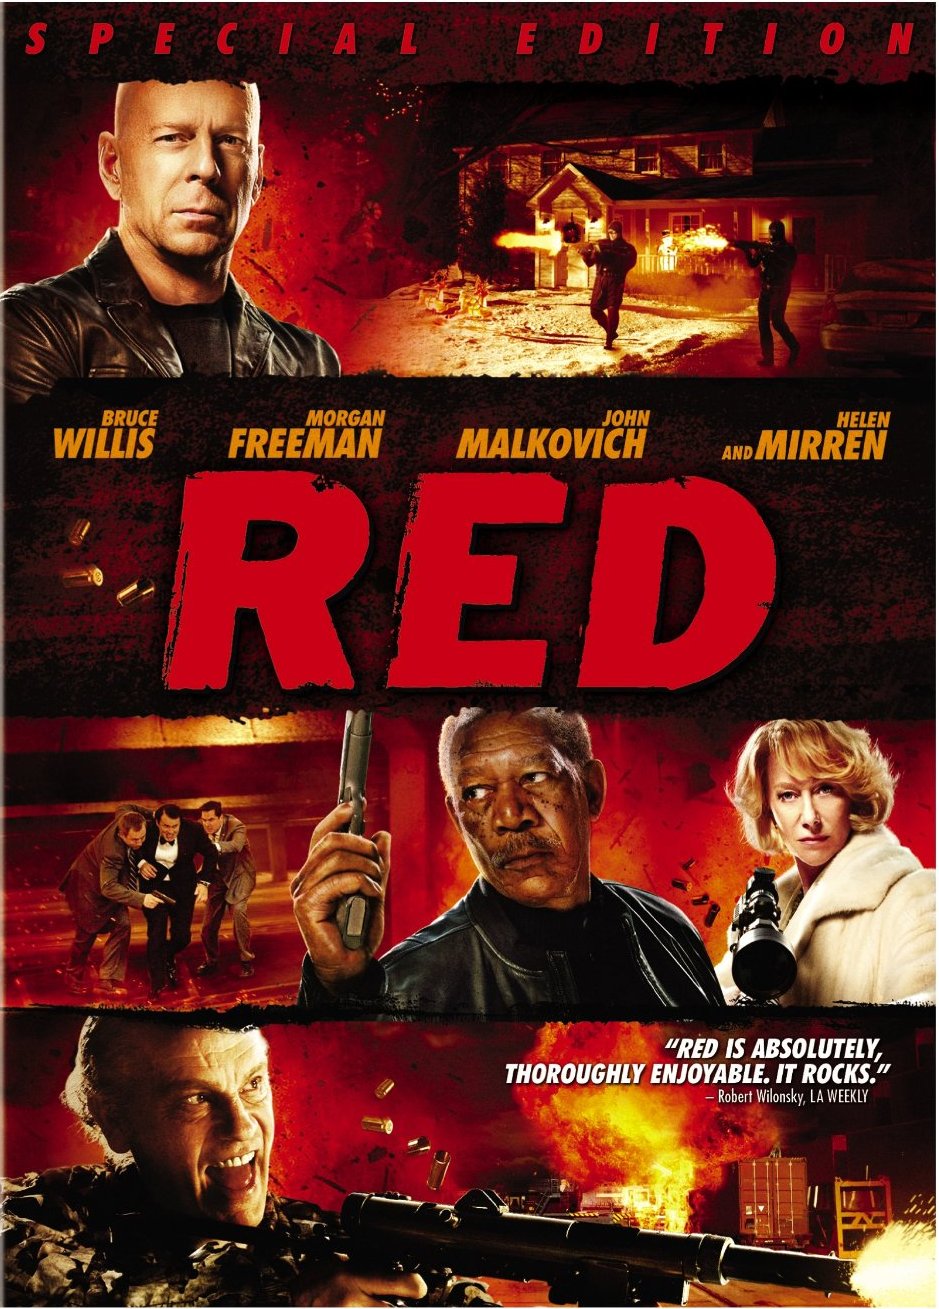 Tips from Chip: Movie – Red (2010)